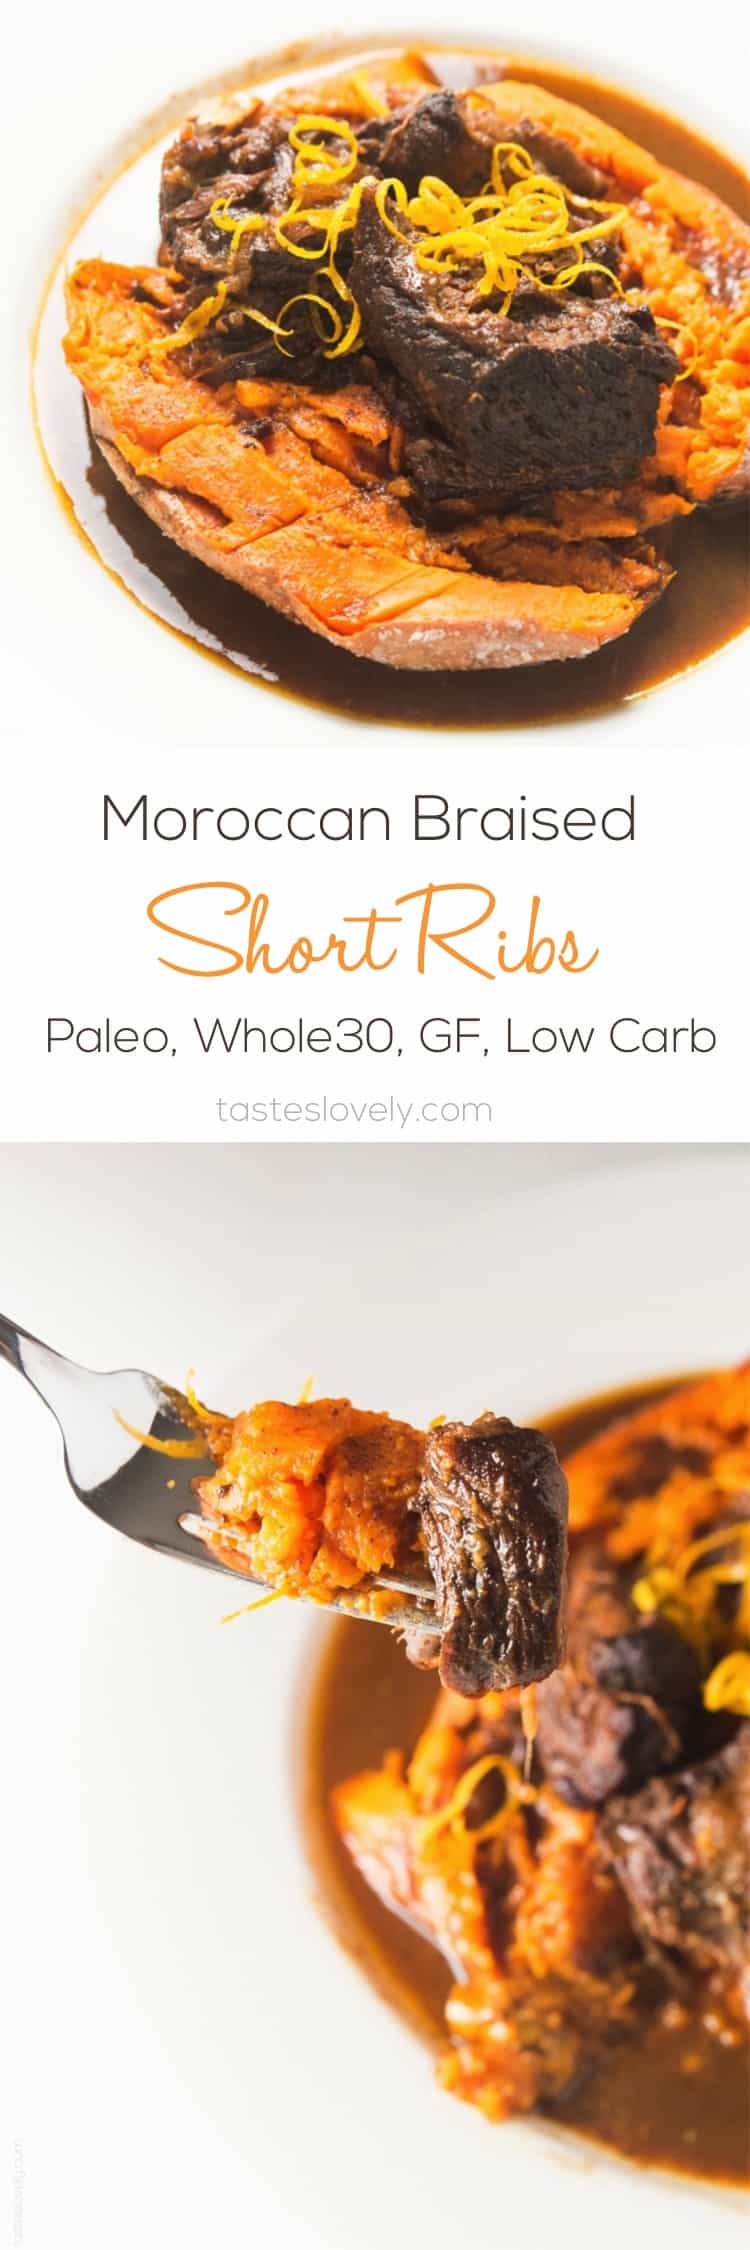 Slow cooker Moroccan Braised Short Ribs - tender, flavorful short ribs cooked in an orange cinnamon sauce, served over a baked sweet potato #paleo #whole30 #glutenfree #lowcarb